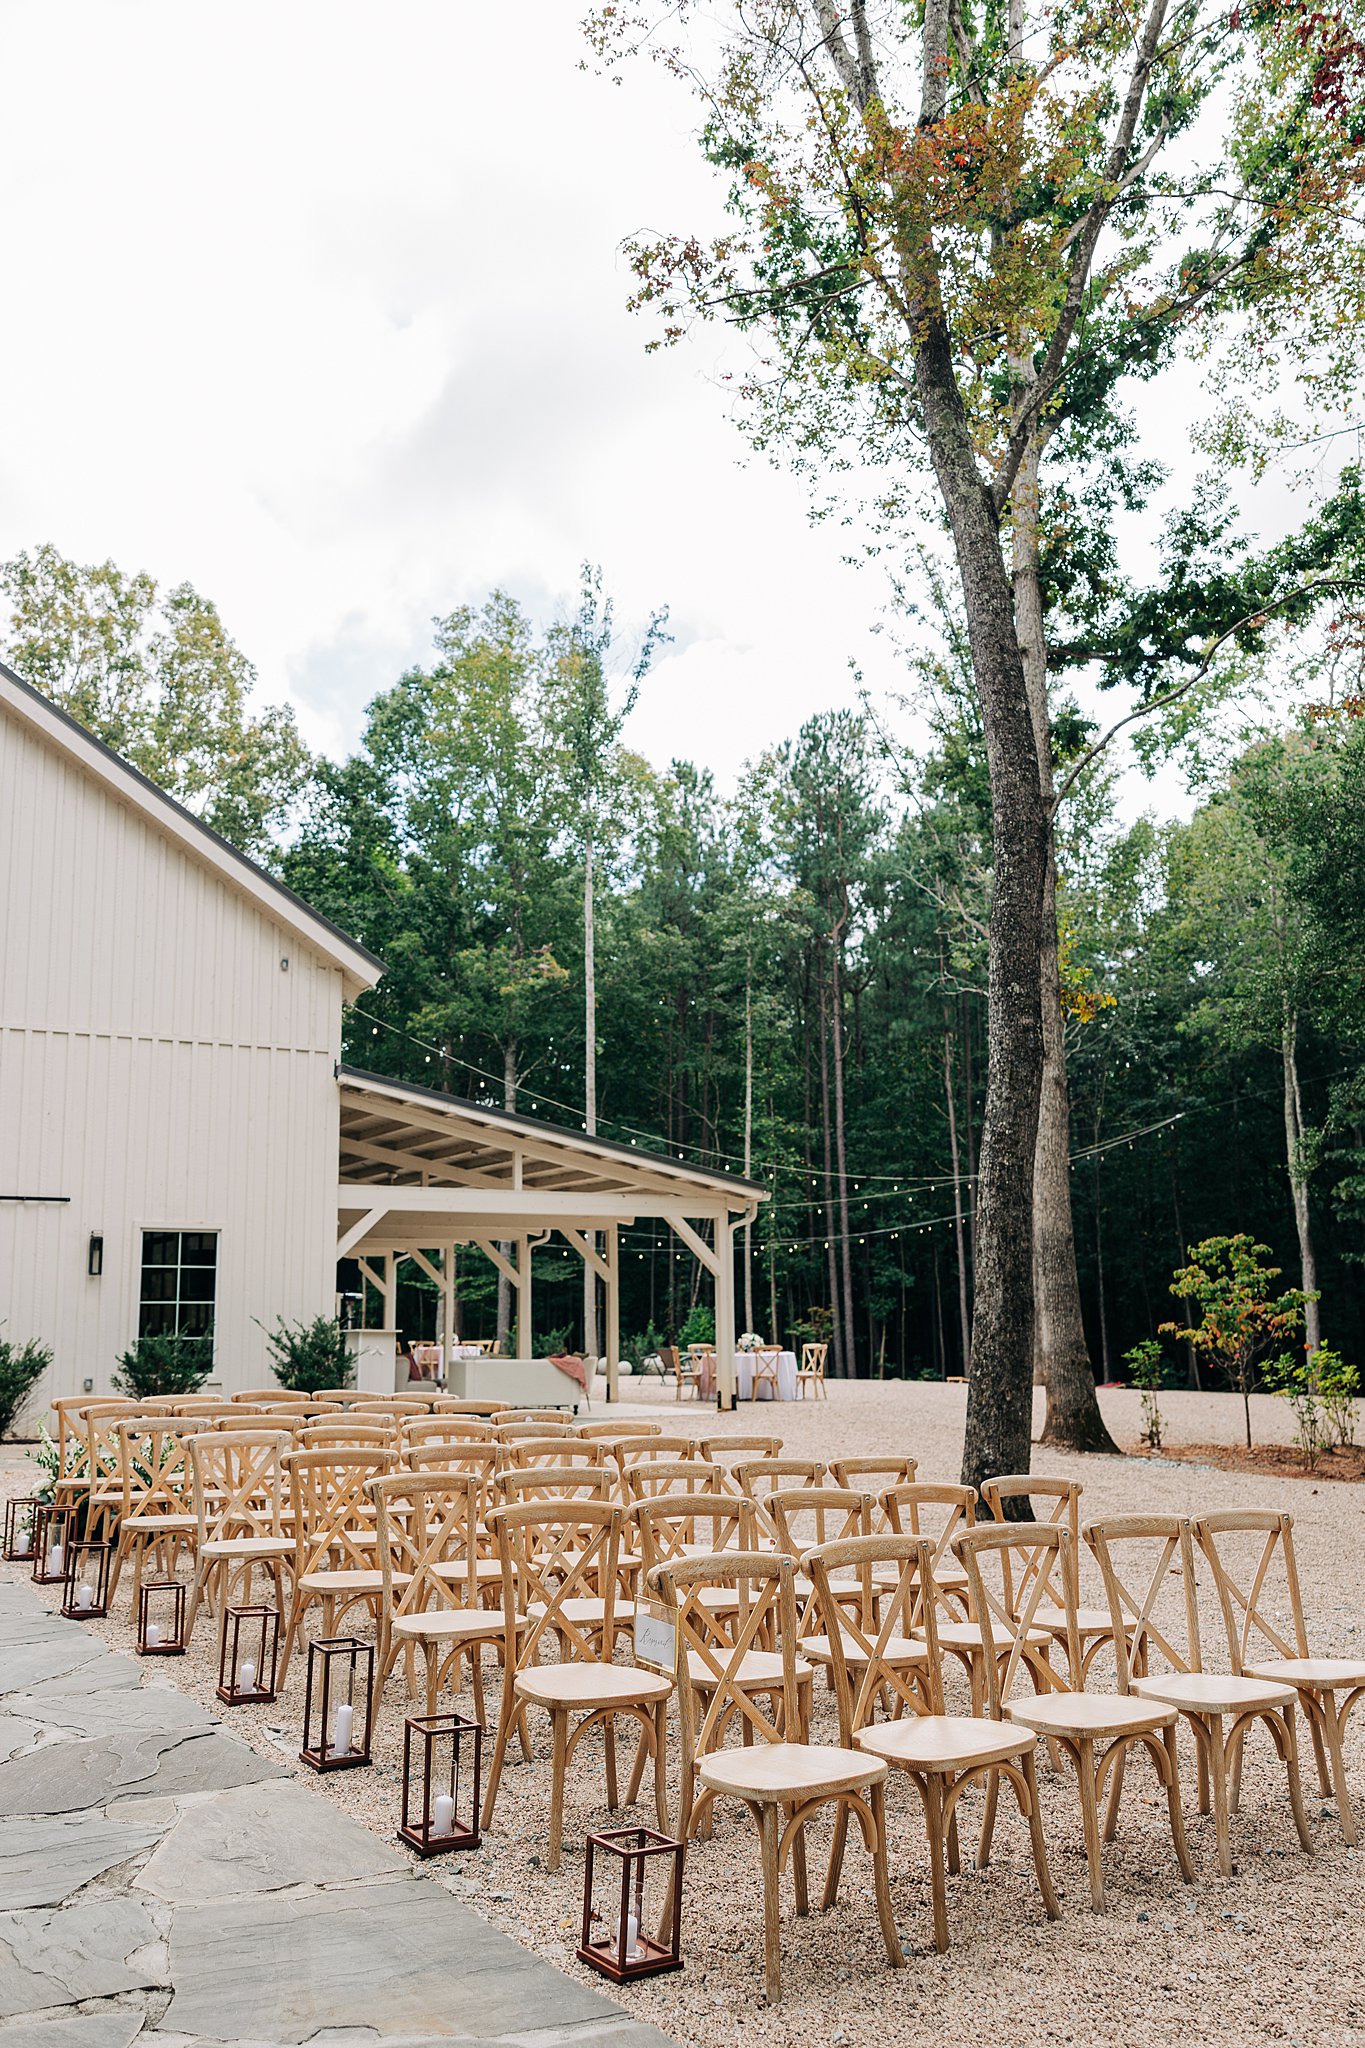 Details of an outdoor wedding ceremony set up with wooden chairs